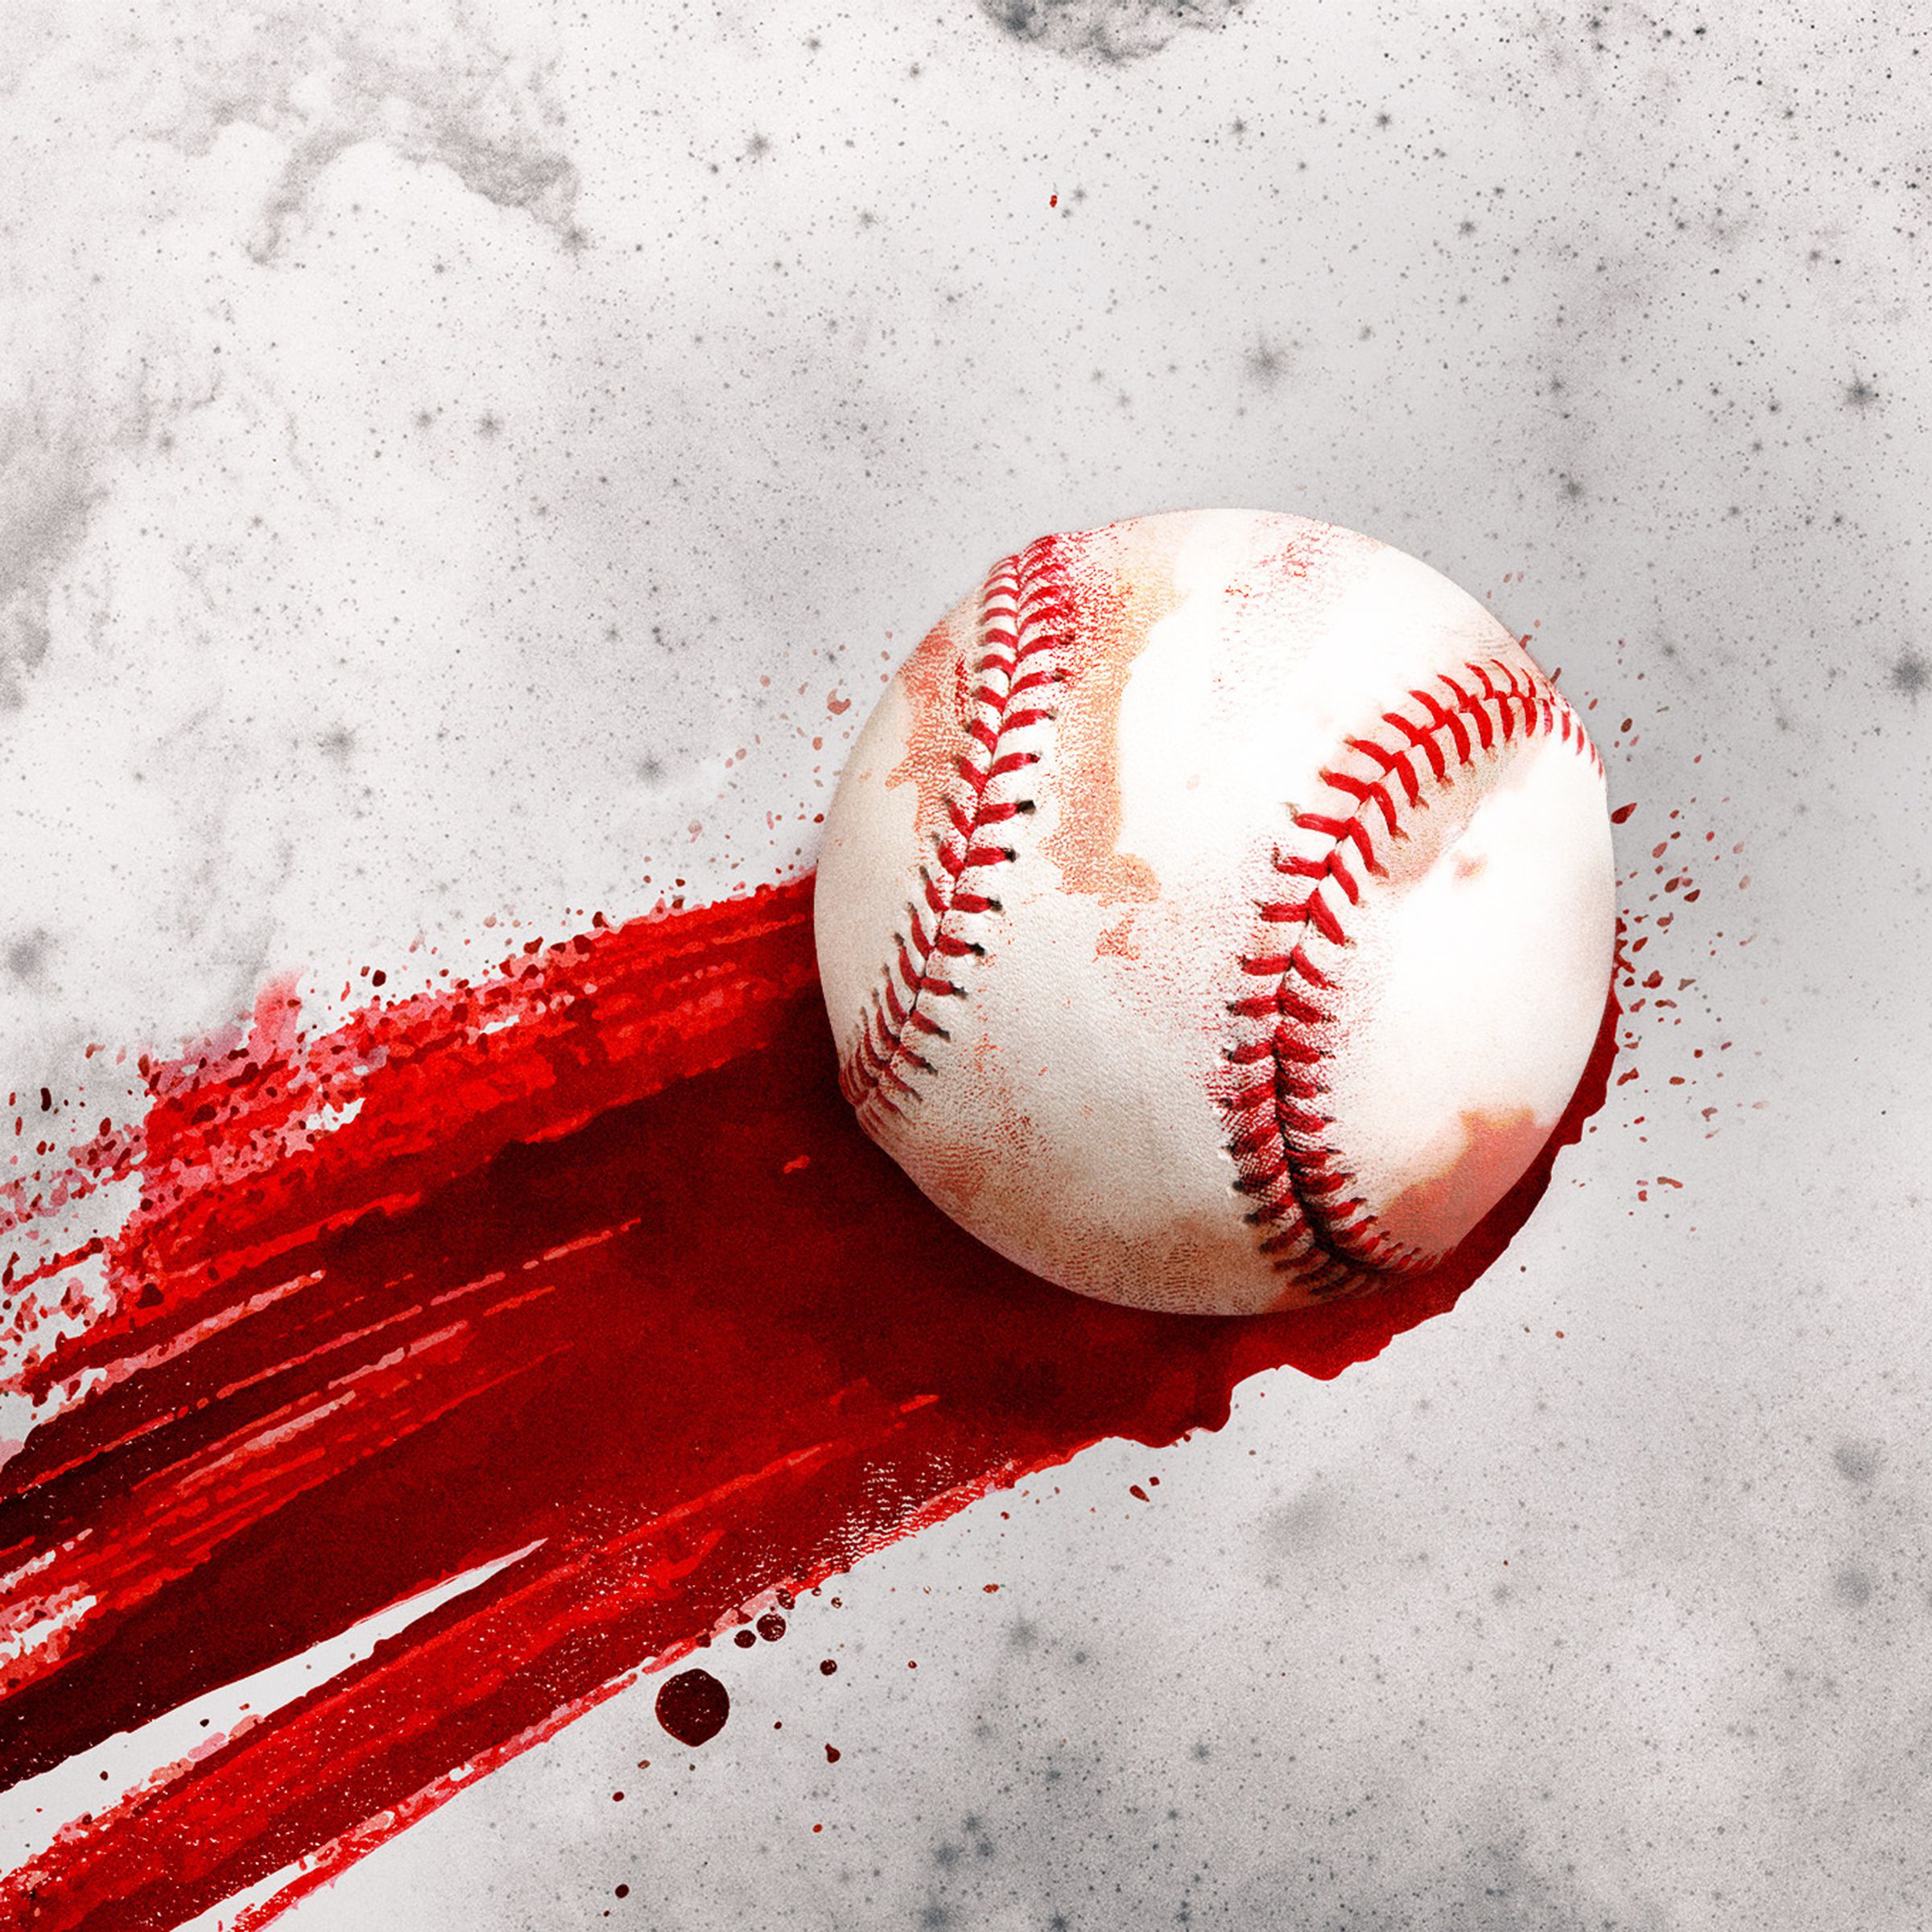 A baseball lays on a surface streaked with blood.